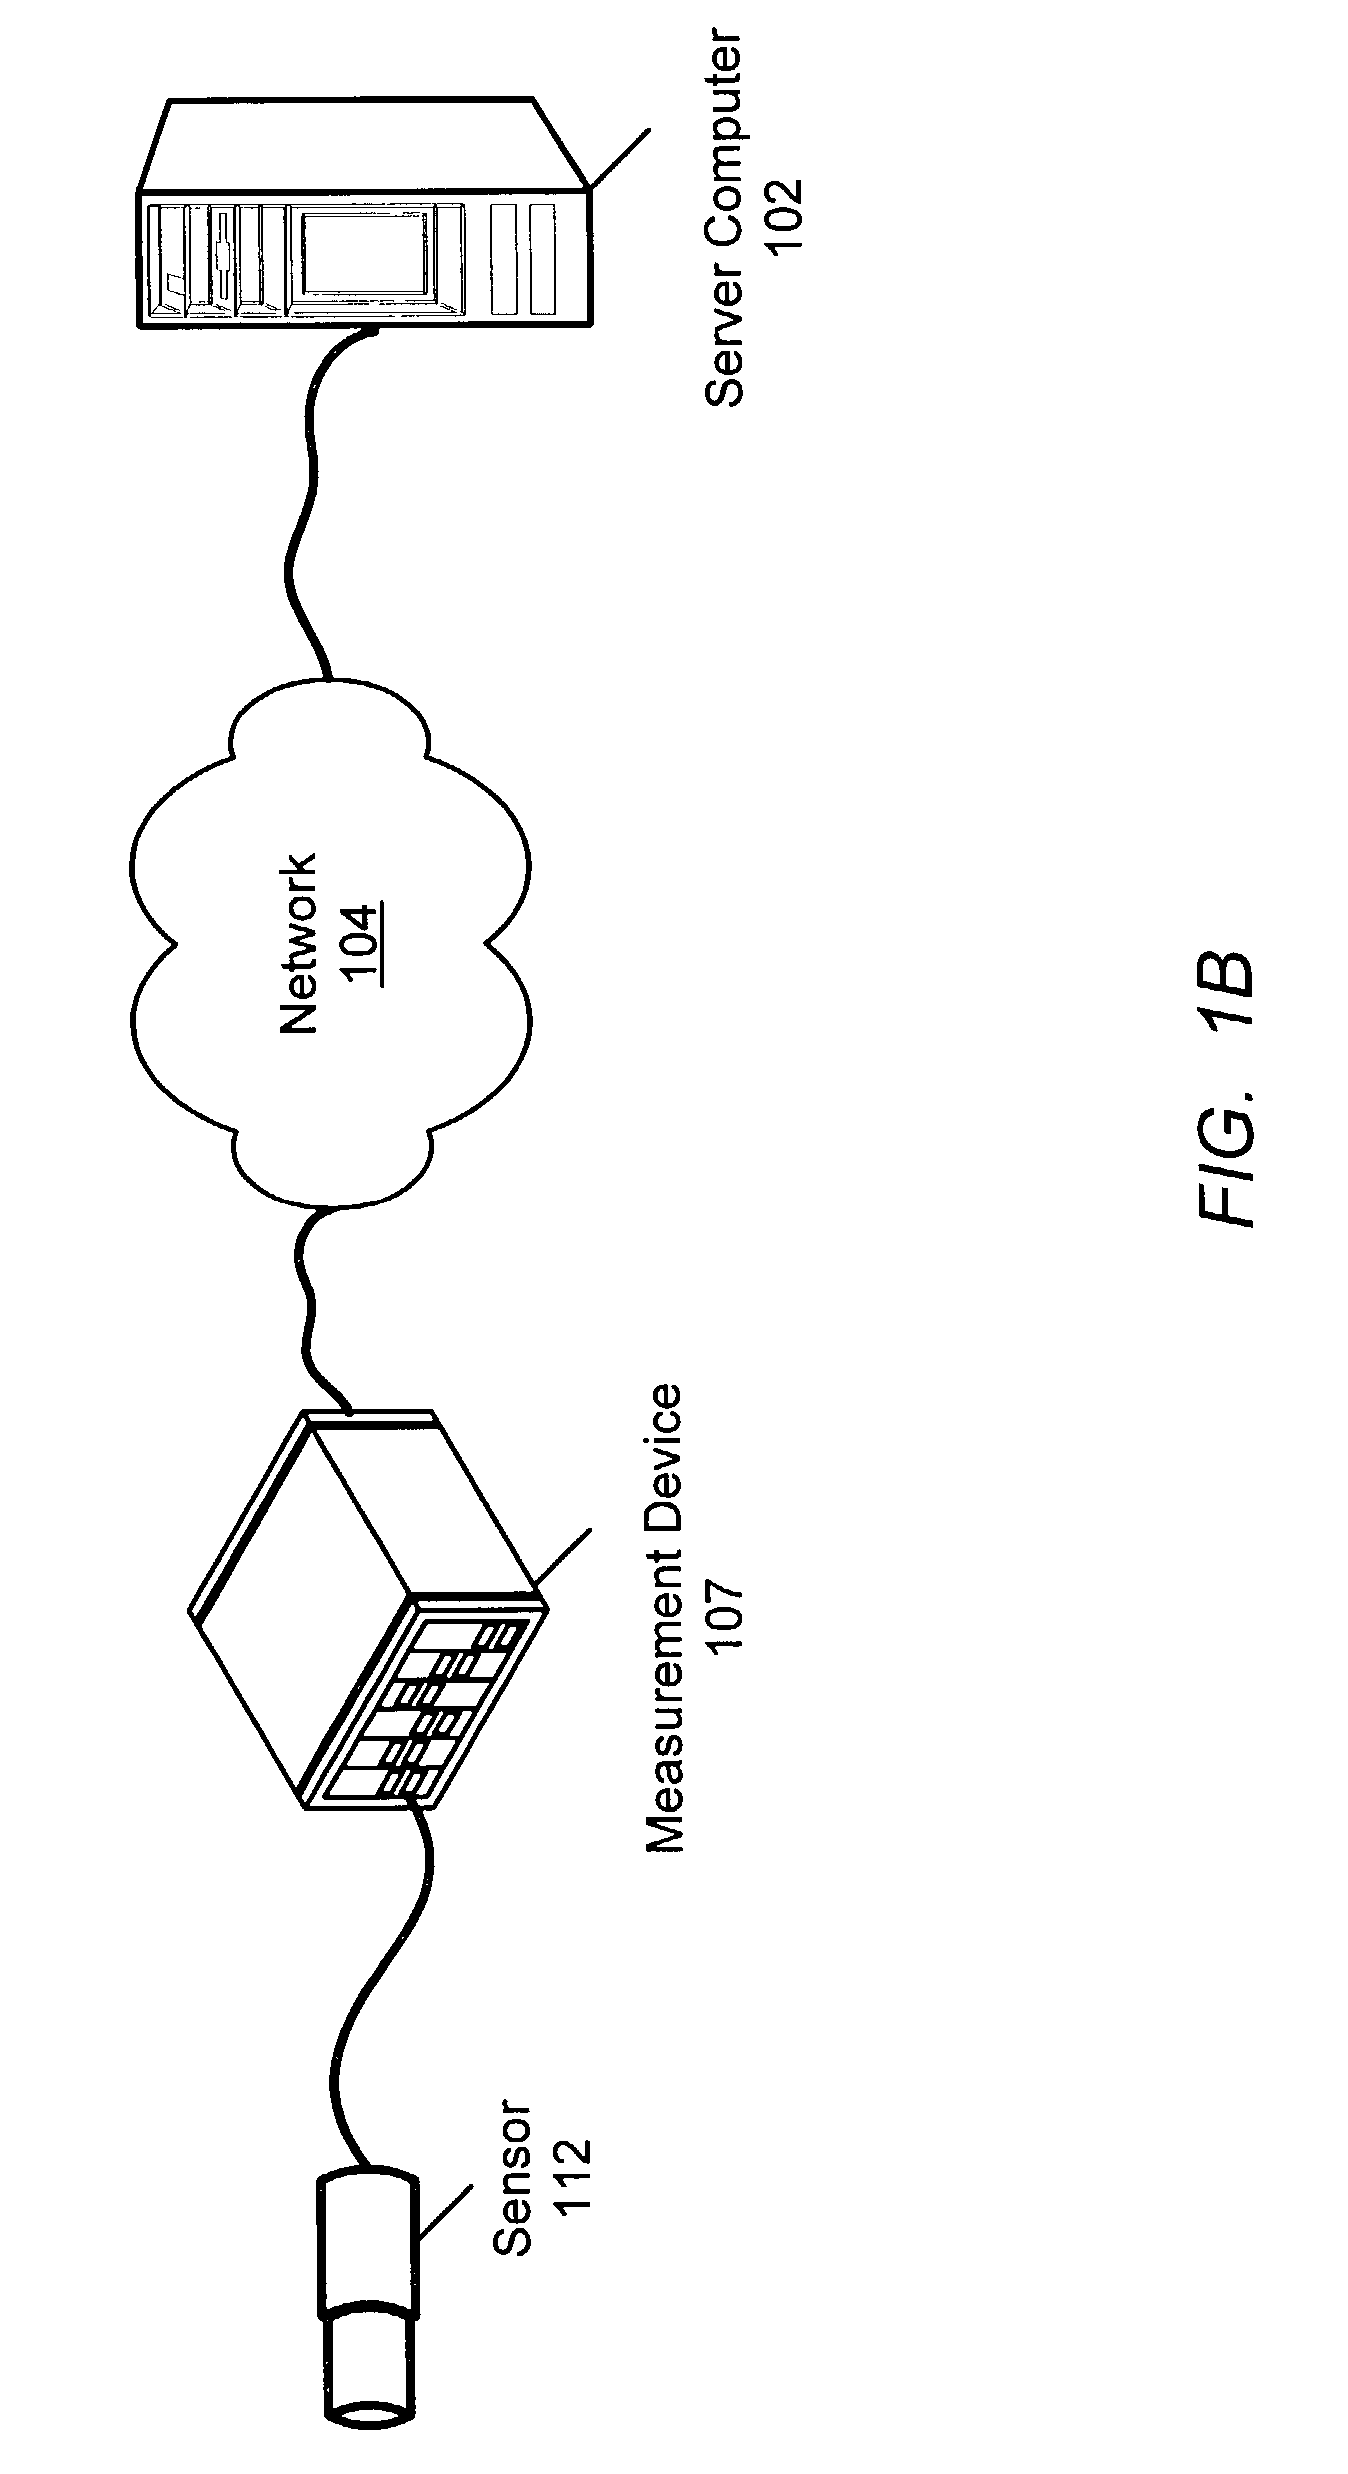 Measurement system with modular measurement modules that convey interface information